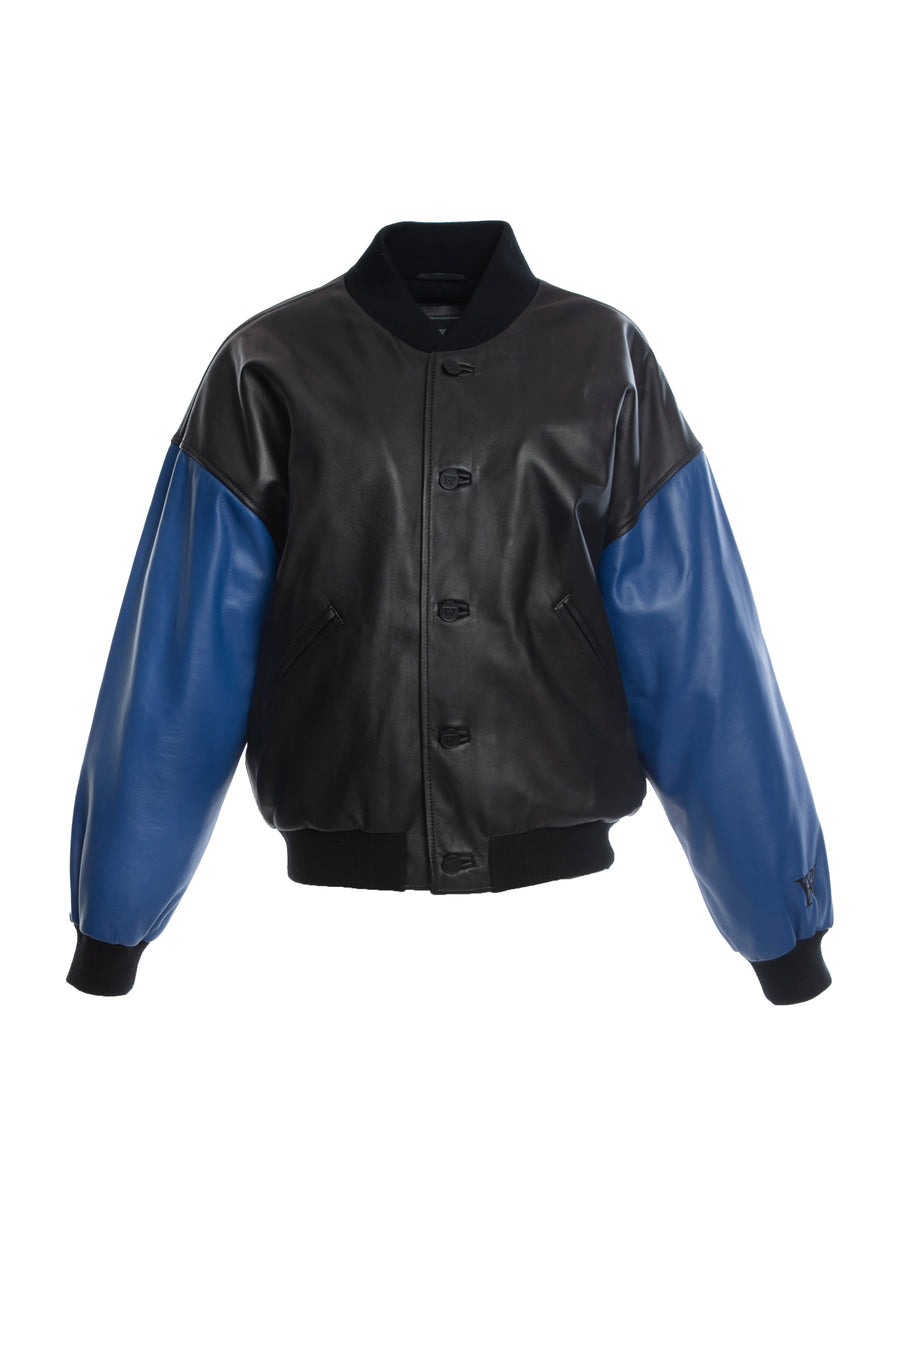 THE SQUAD UNISEX LEATHER BOMBER IN BLACK AND BLUE